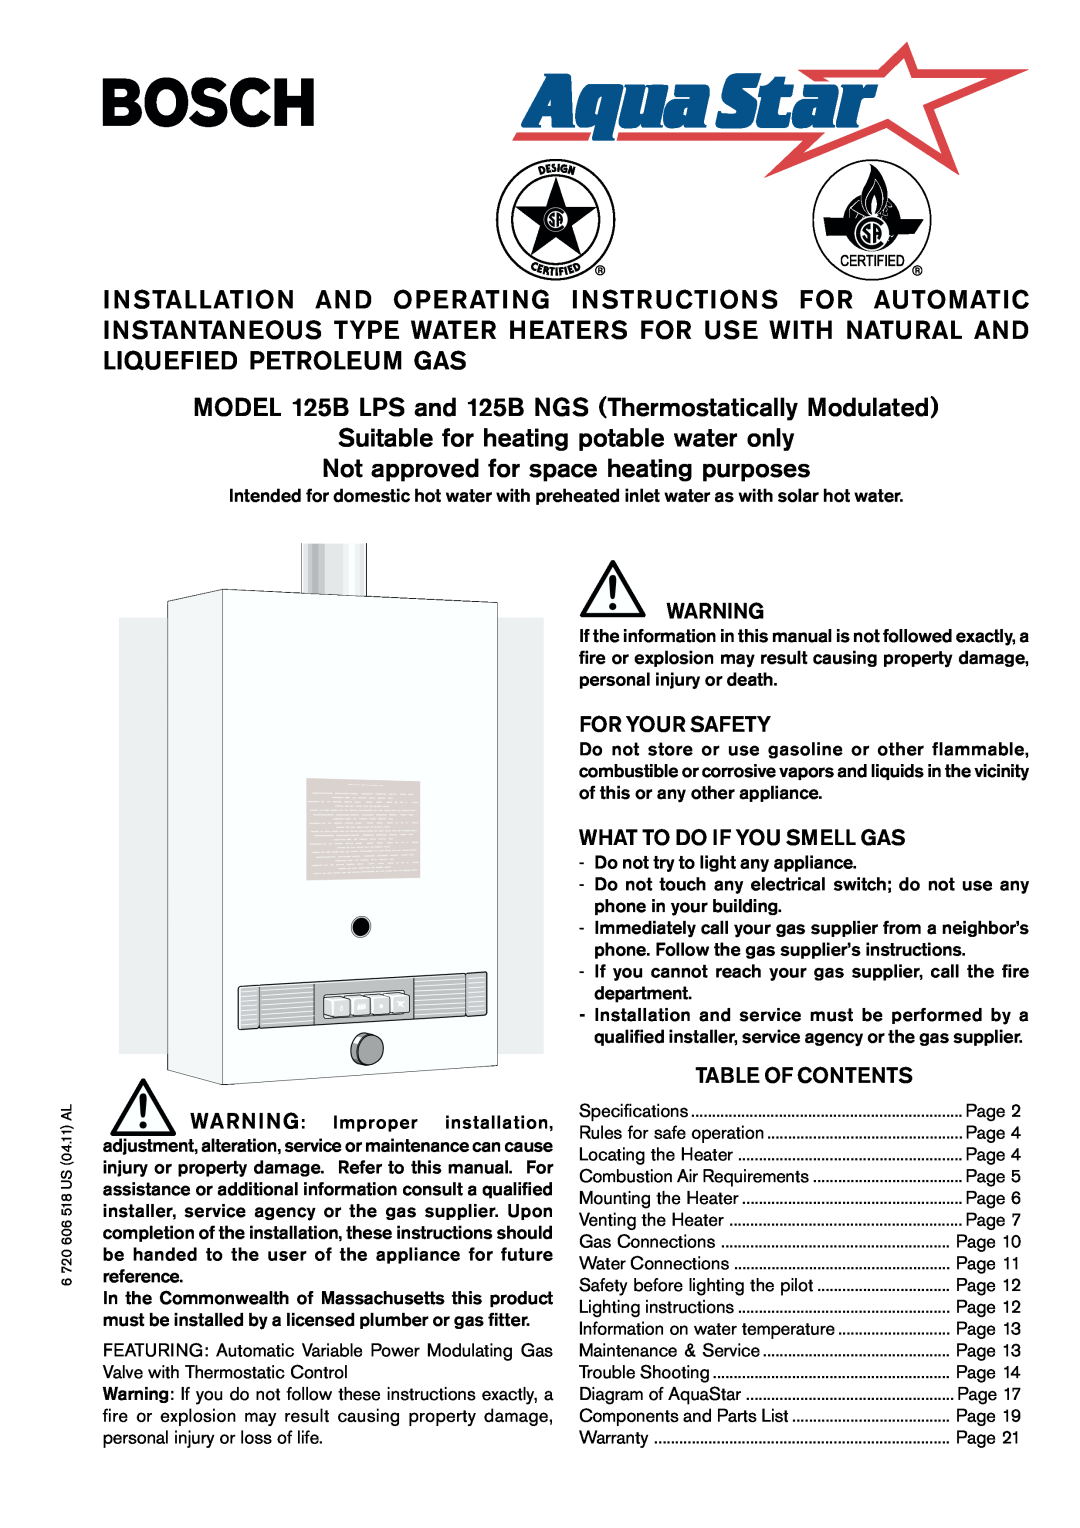 Bosch Appliances operating instructions MODEL 125B LPS and 125B NGS Thermostatically Modulated 